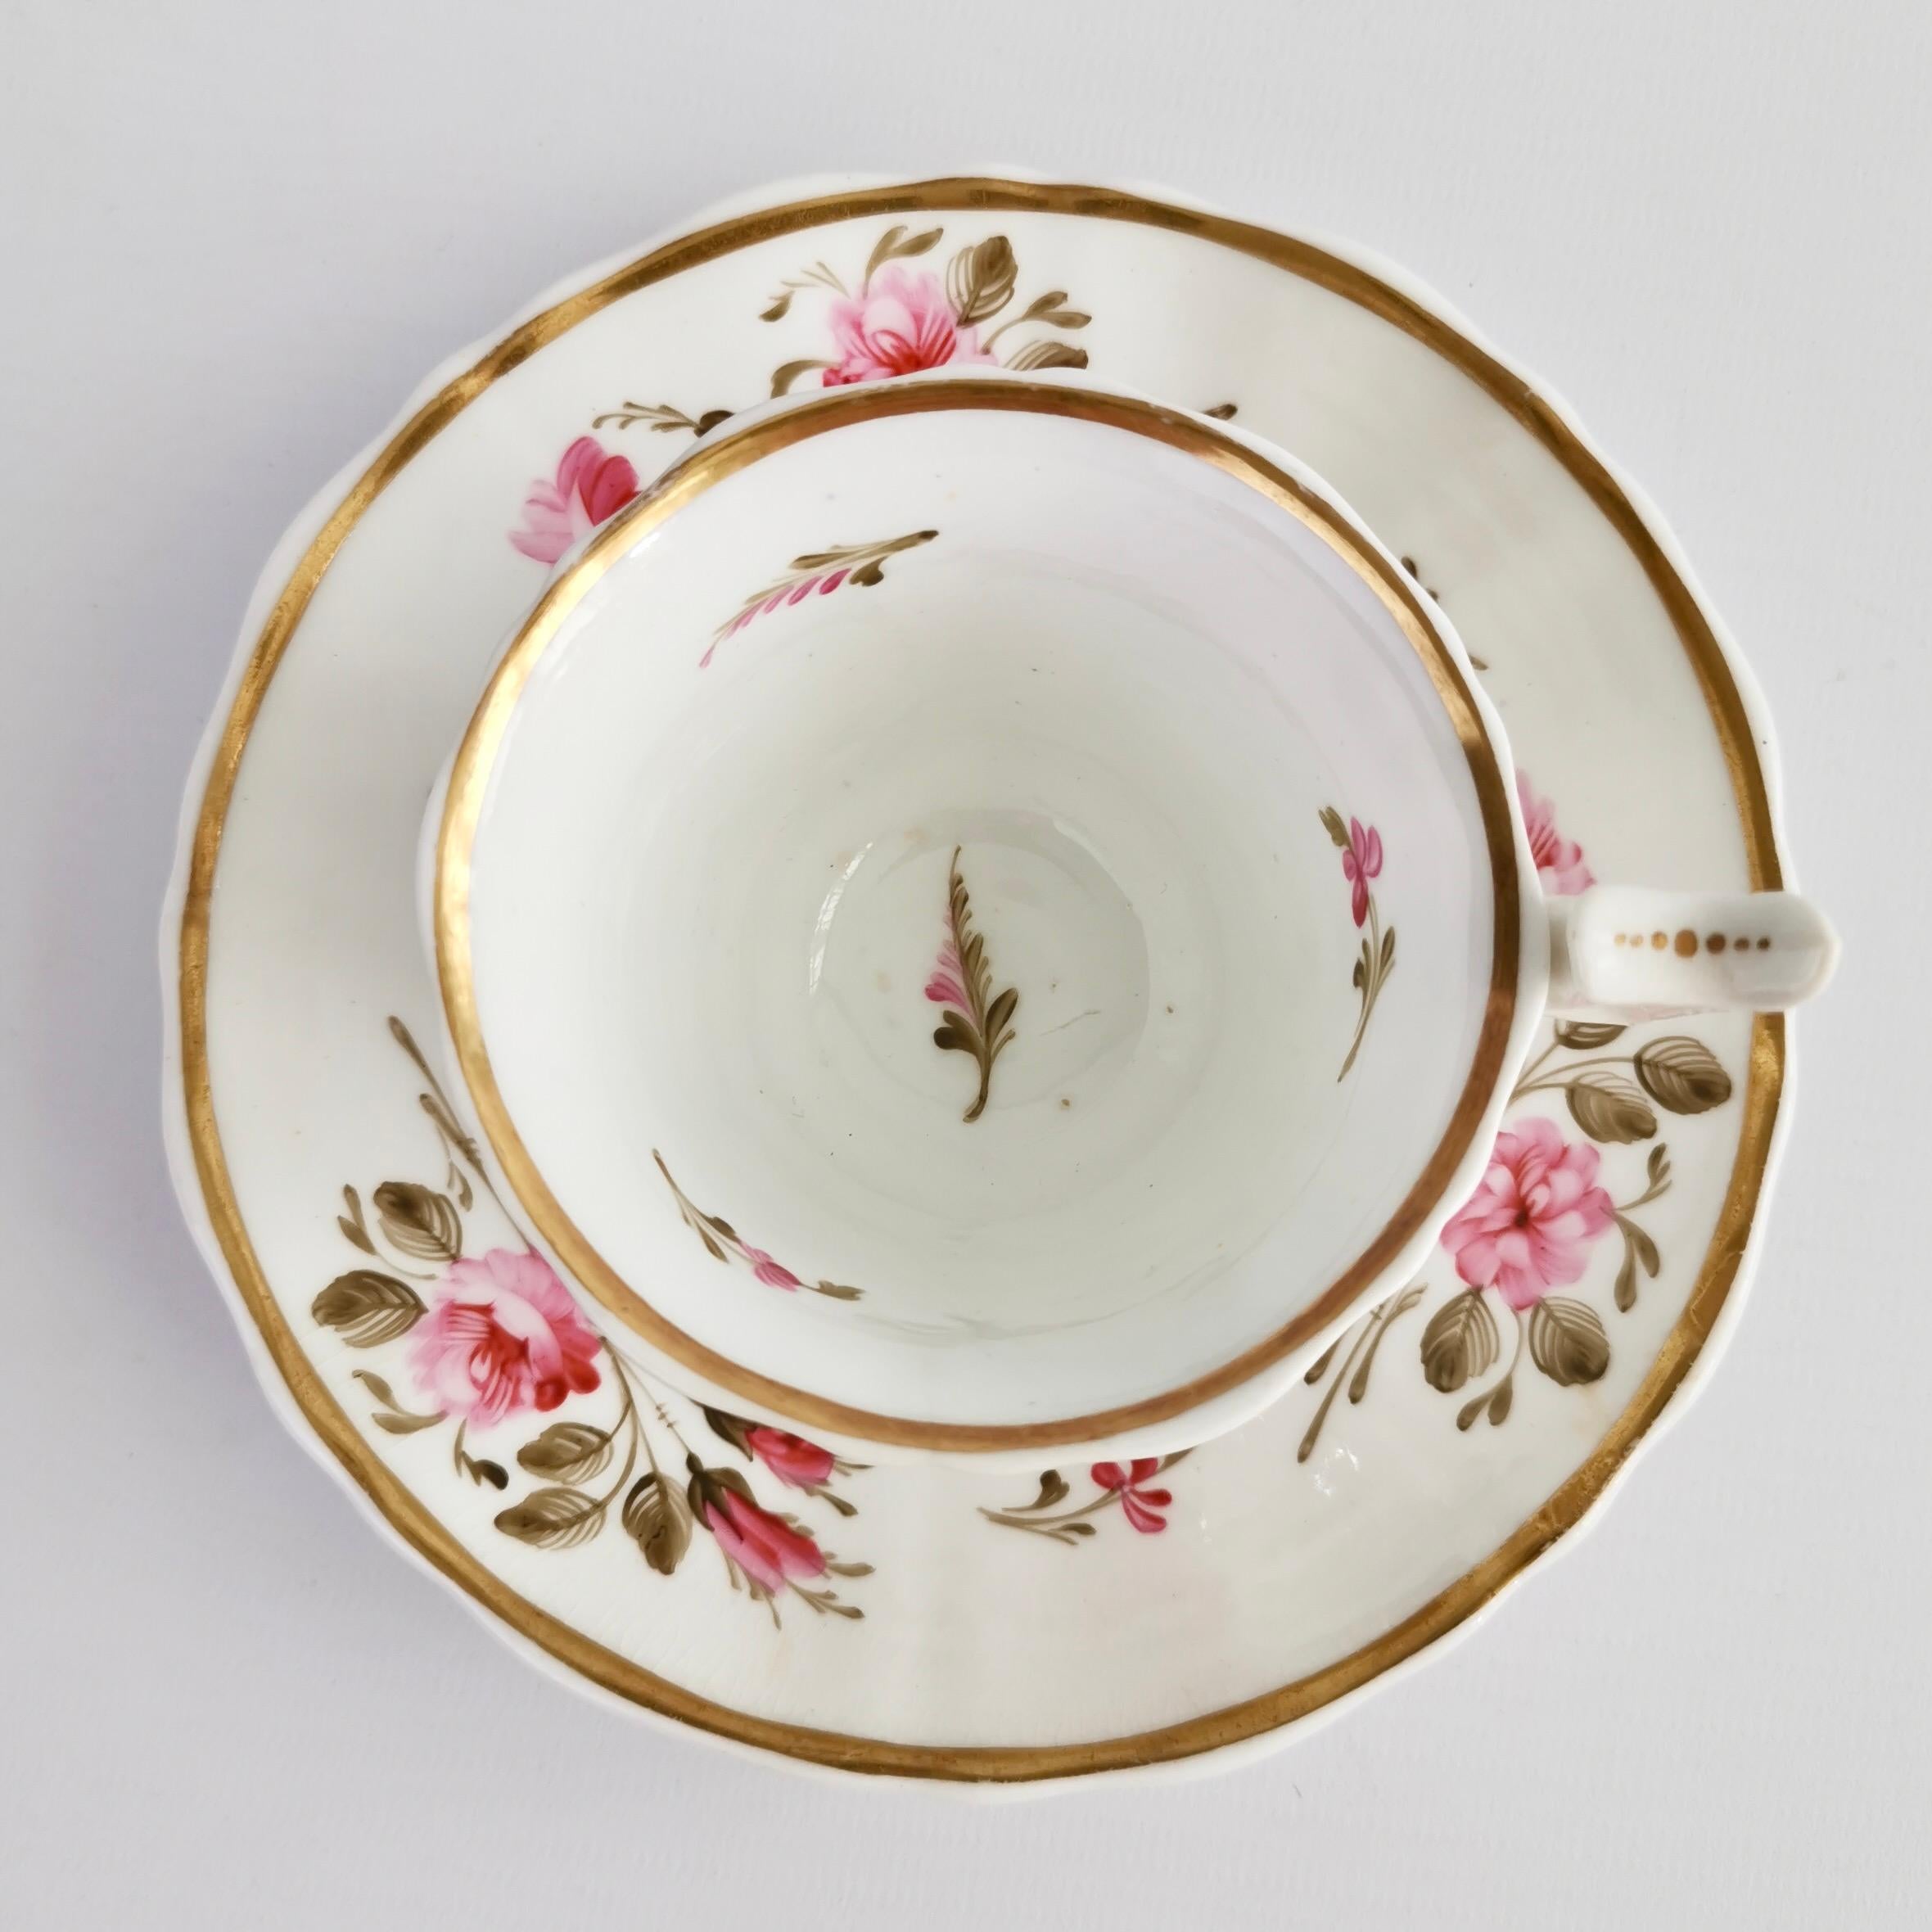 English Ridgway Porcelain Coffee Cup, Pink Roses on White, Regency ca 1825